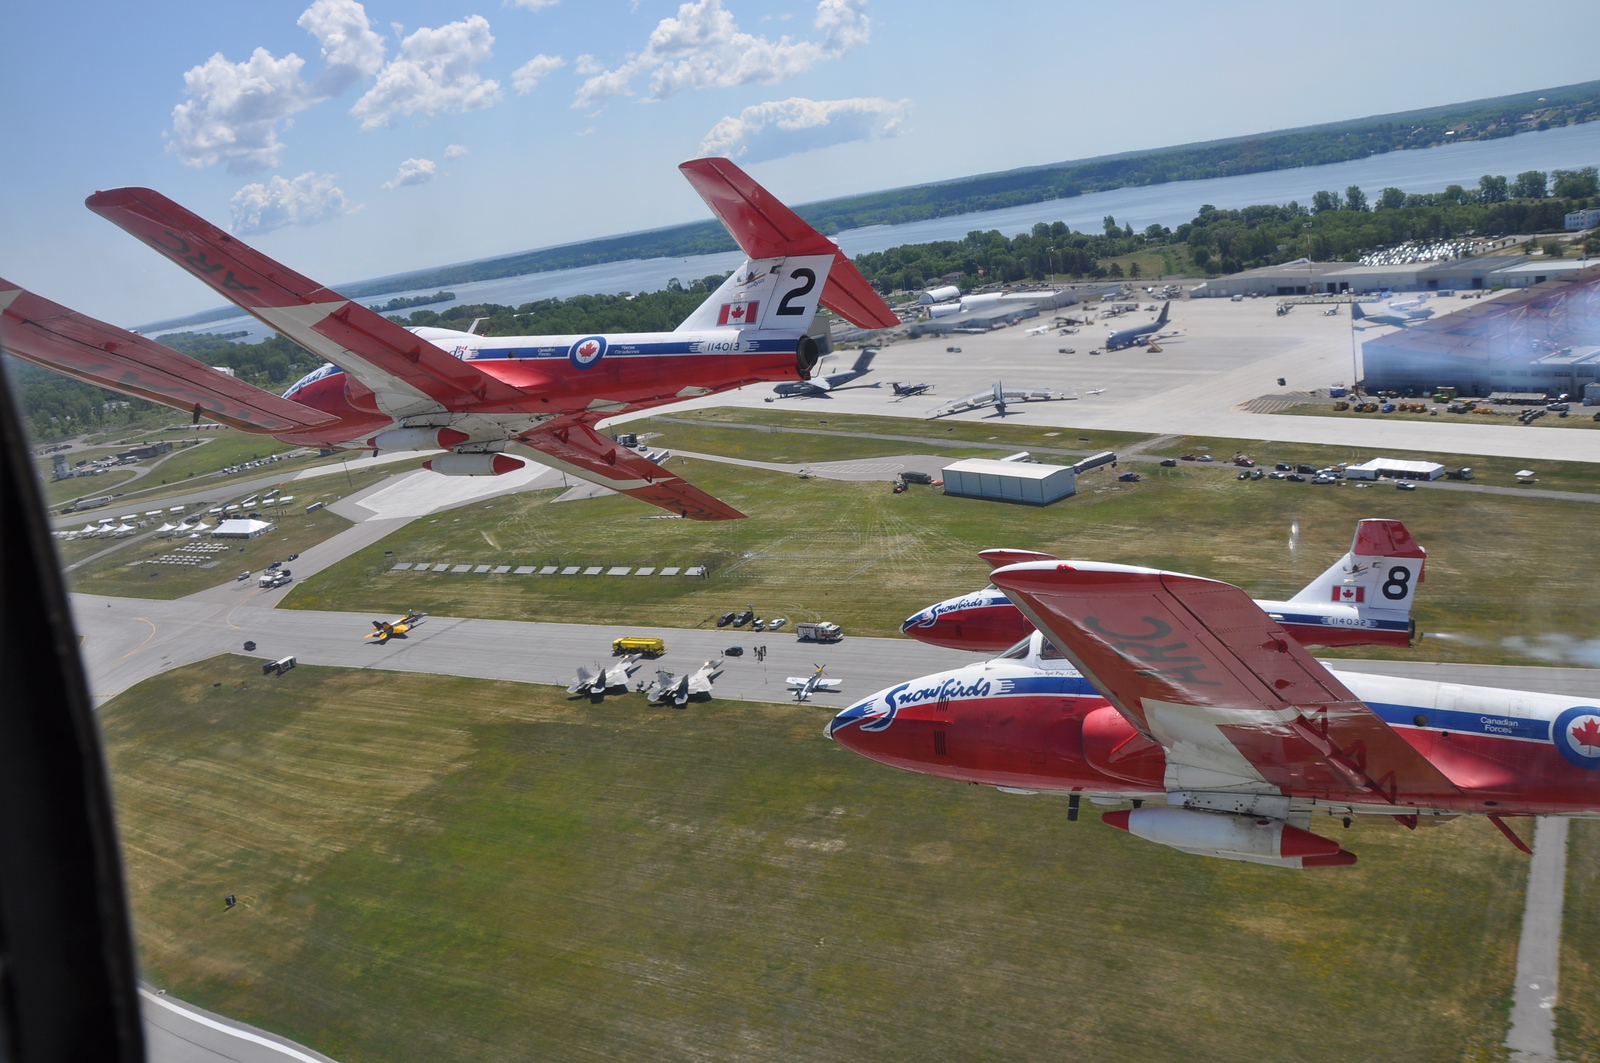 two snowbird airplanes flying over the CFB Trenton air base, taken from an adjacent plane